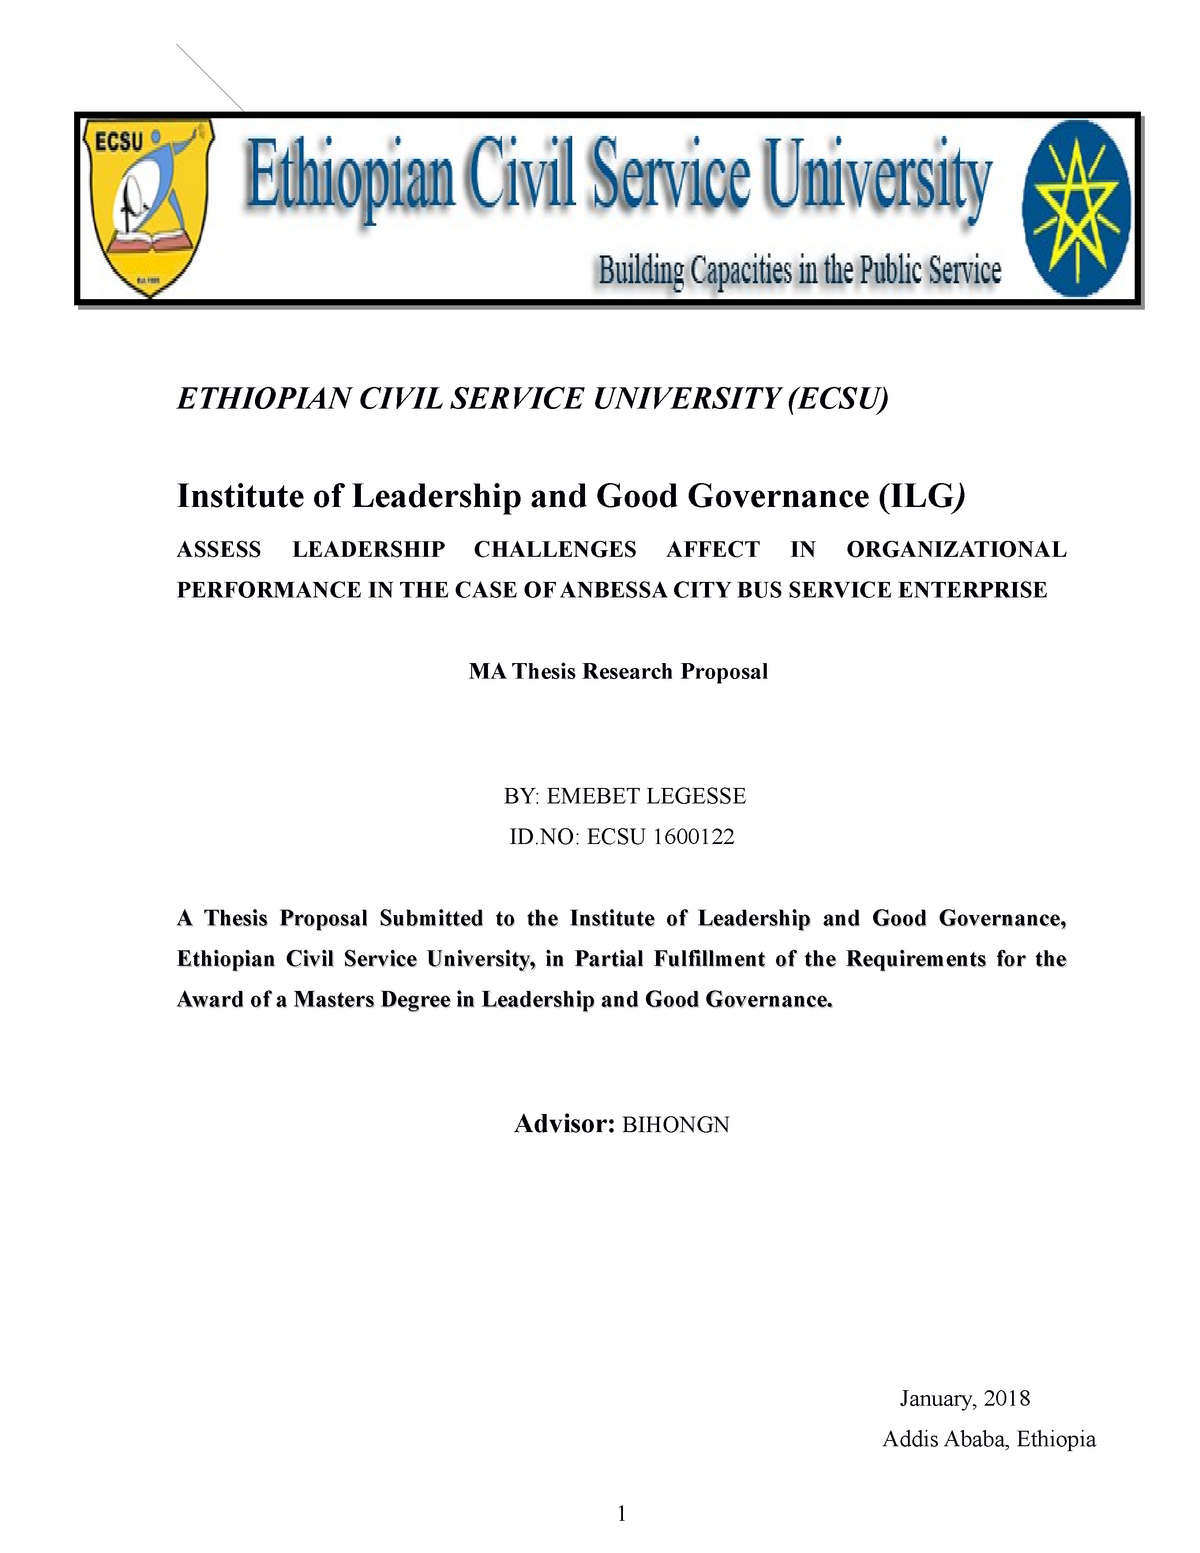 mba research thesis in ethiopia pdf